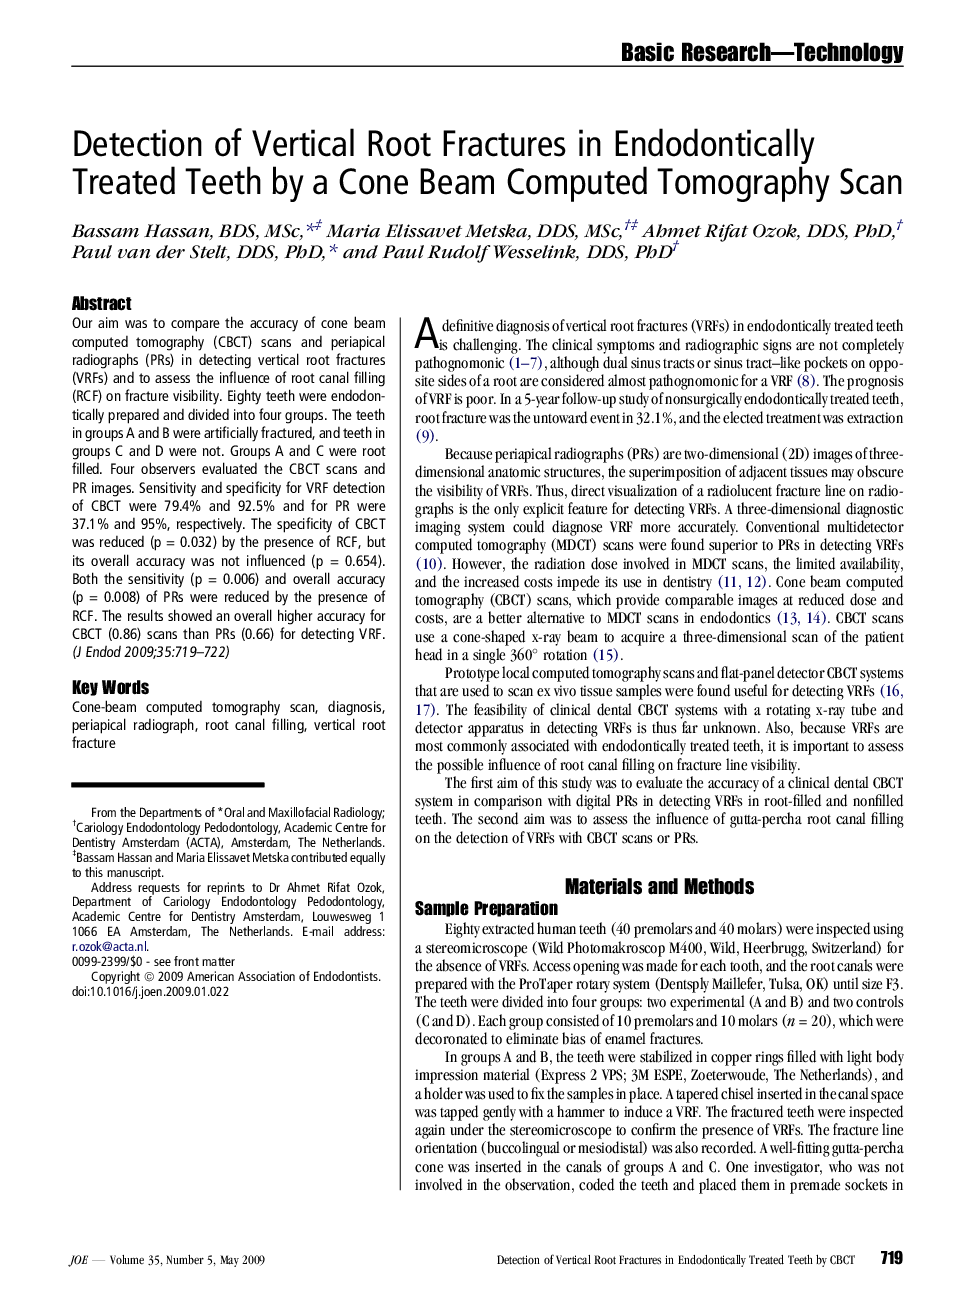 Detection of Vertical Root Fractures in Endodontically Treated Teeth by a Cone Beam Computed Tomography Scan